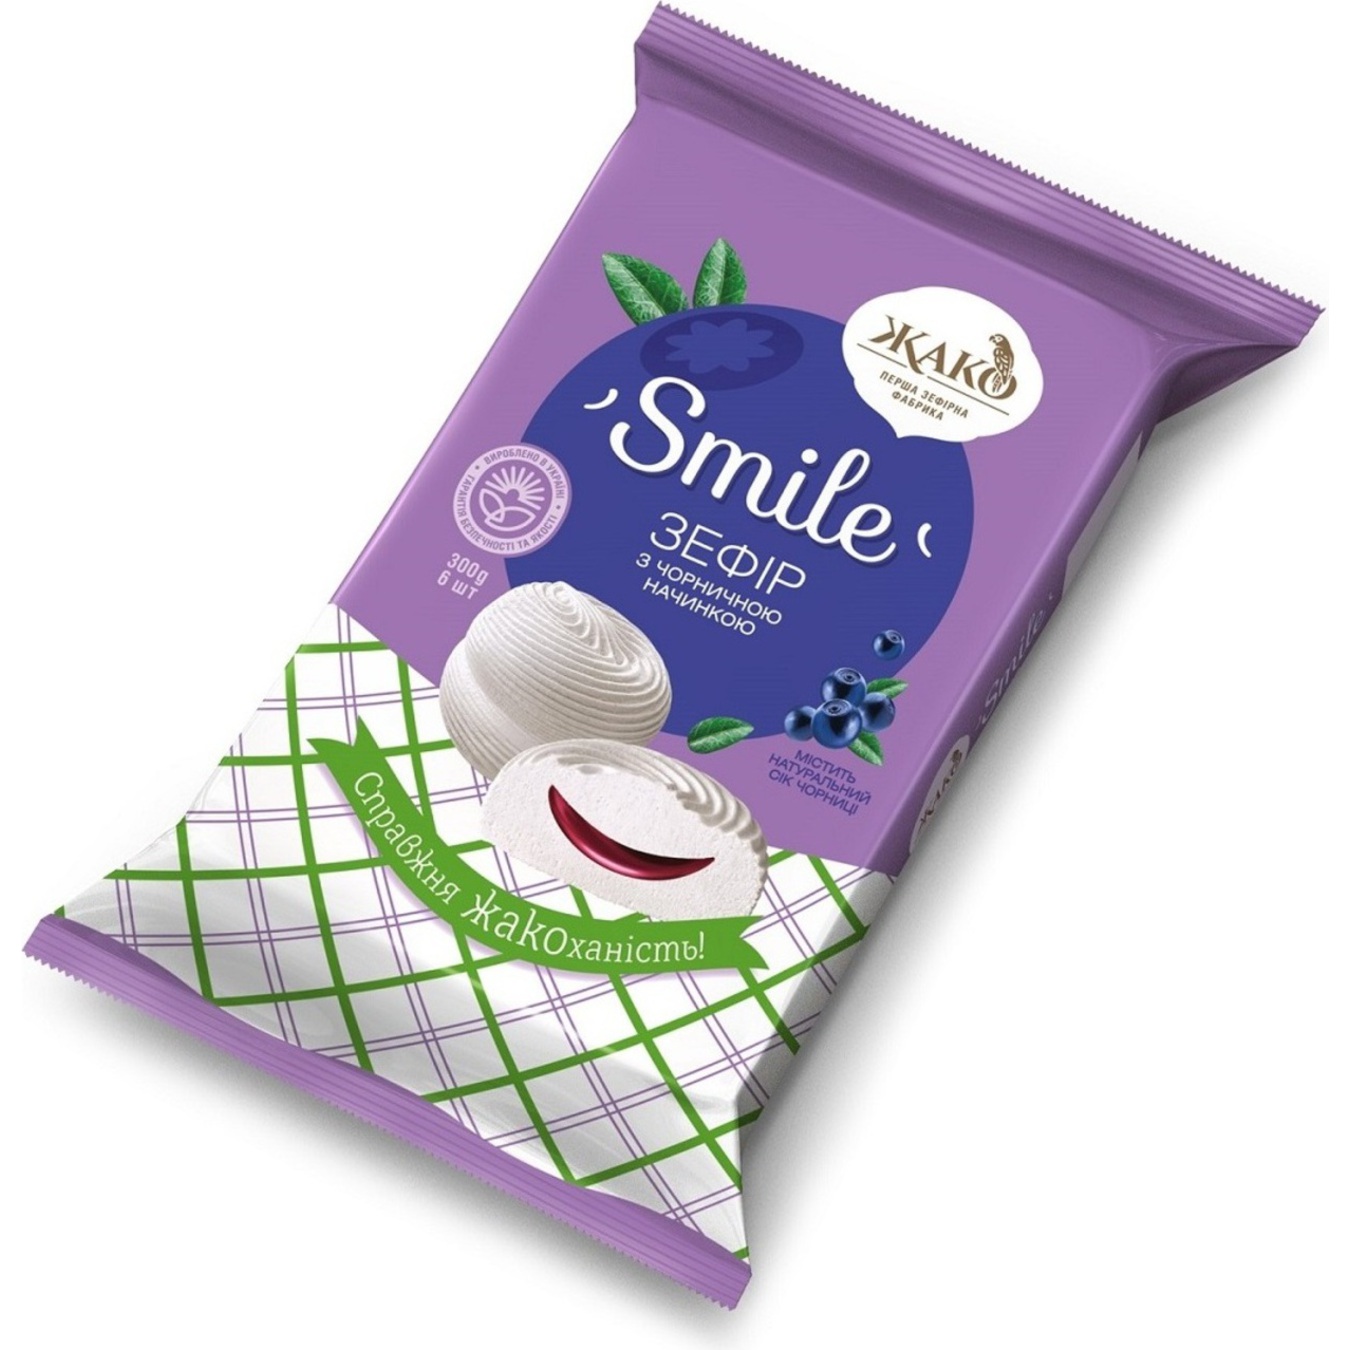 Jaco Zefir Smile with Blueberry 300g